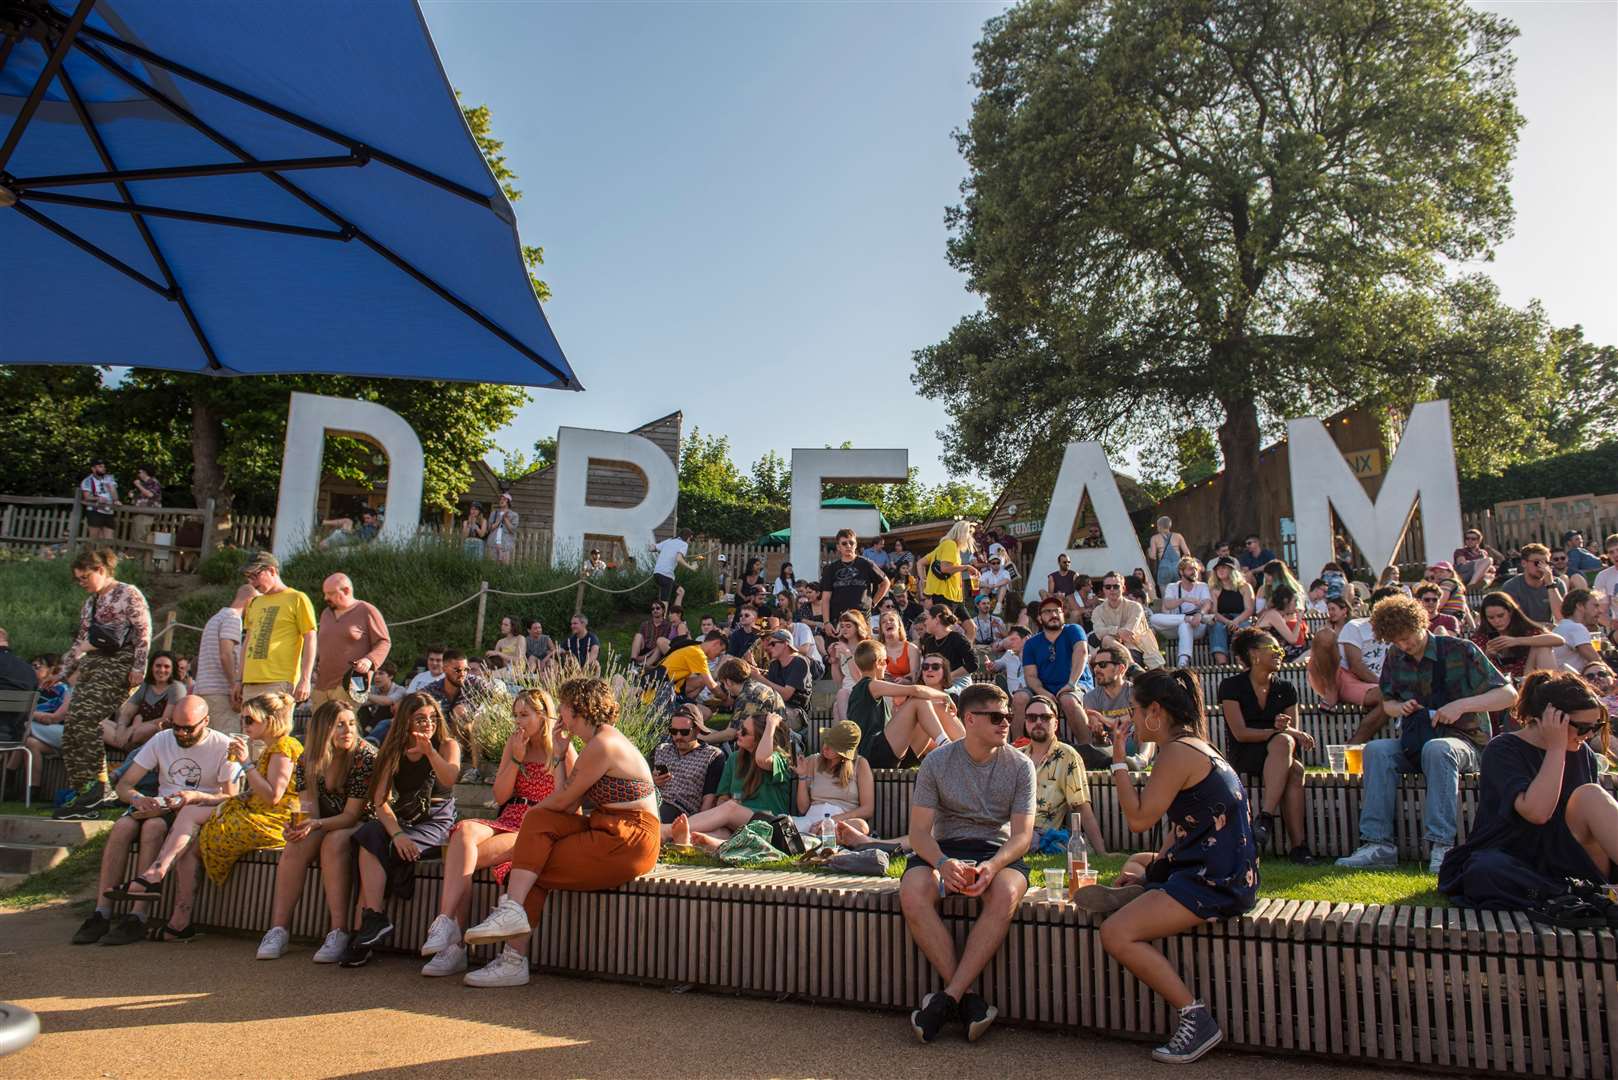 Dreamland has pushed dates back to 2021